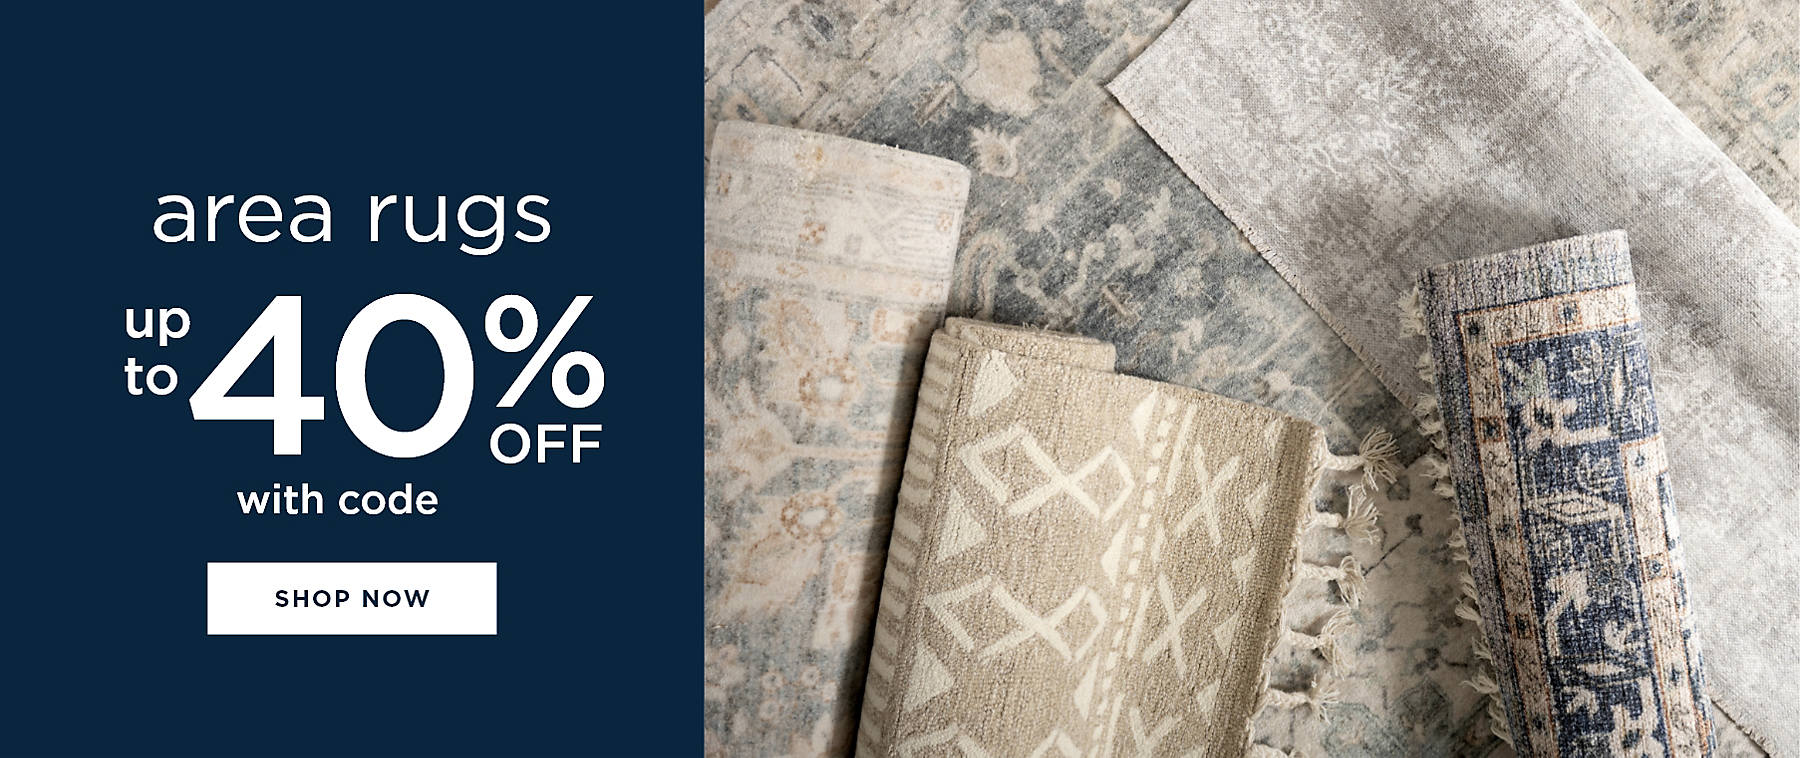 area rugs up to 40% off with code shop now